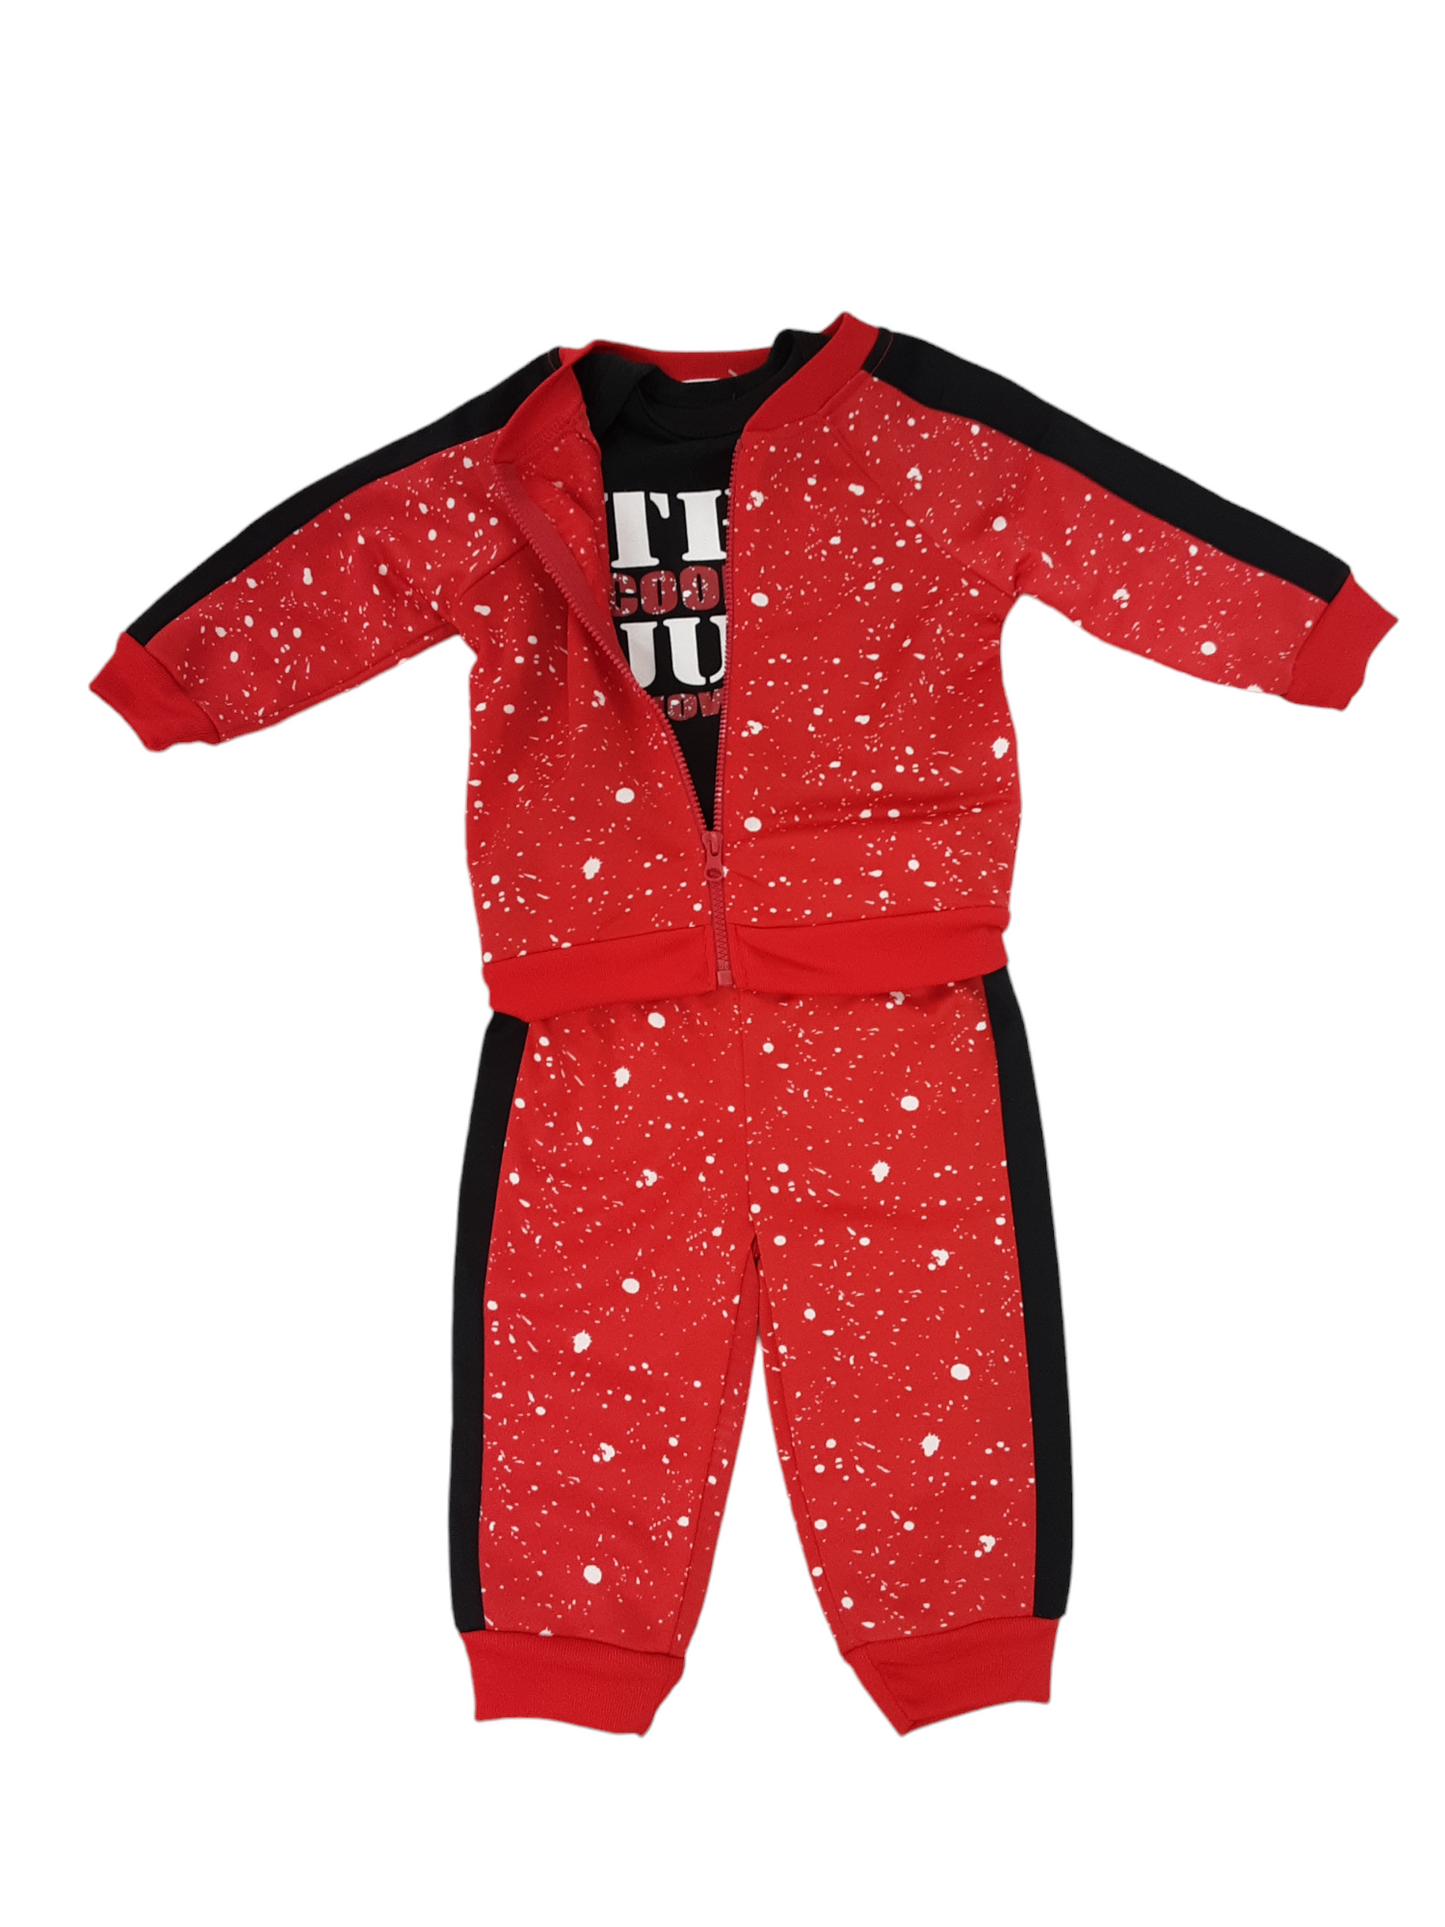 Speckle look 3 pc outfit size 6 to 9 months